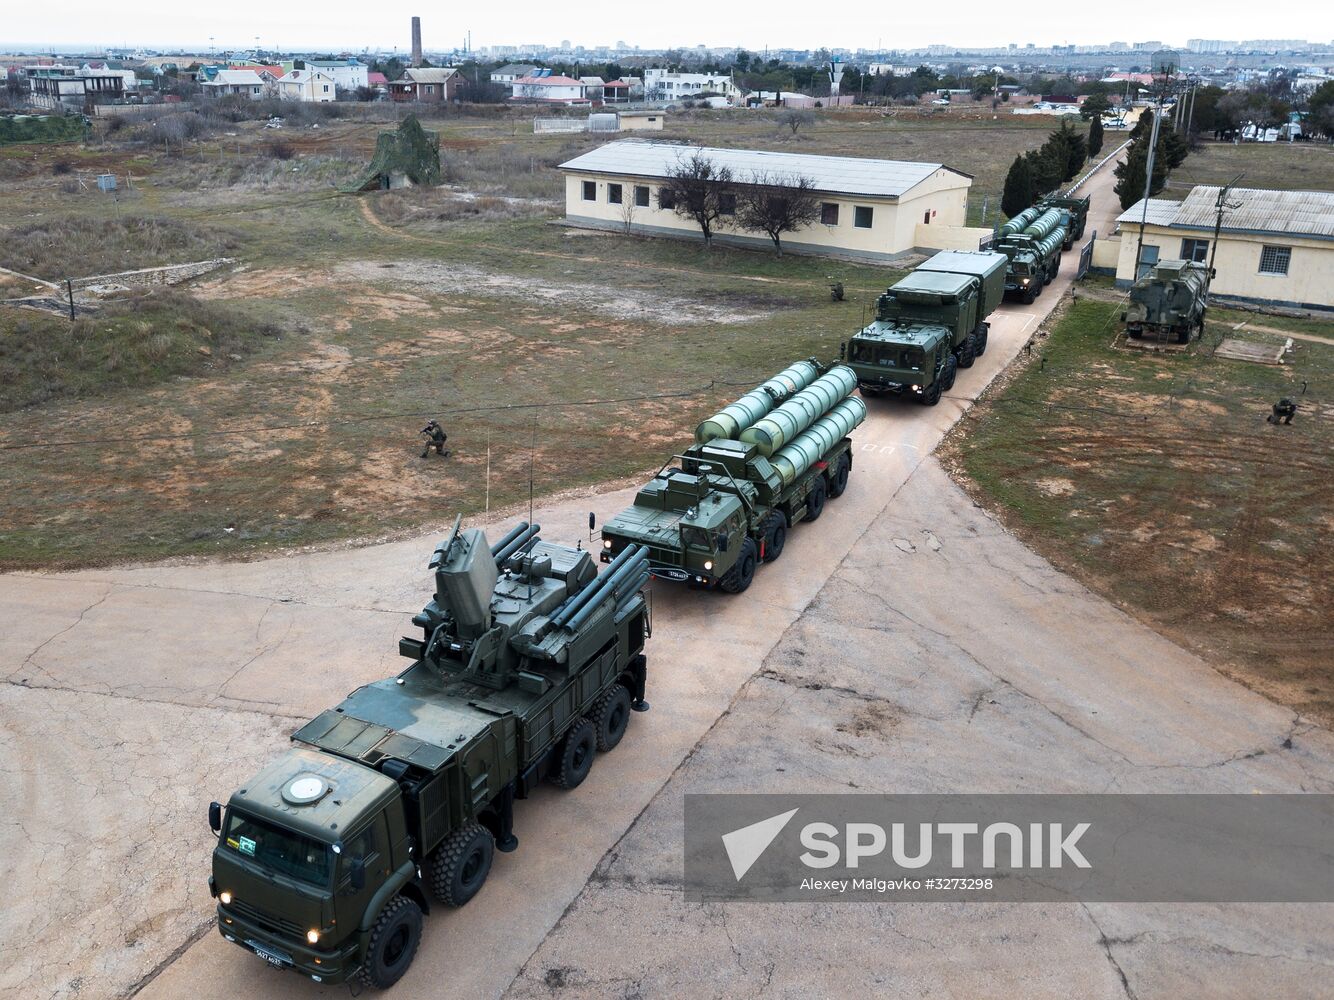 S-400 Triumf anti-air missile systems put on combat duty in Sevastopol